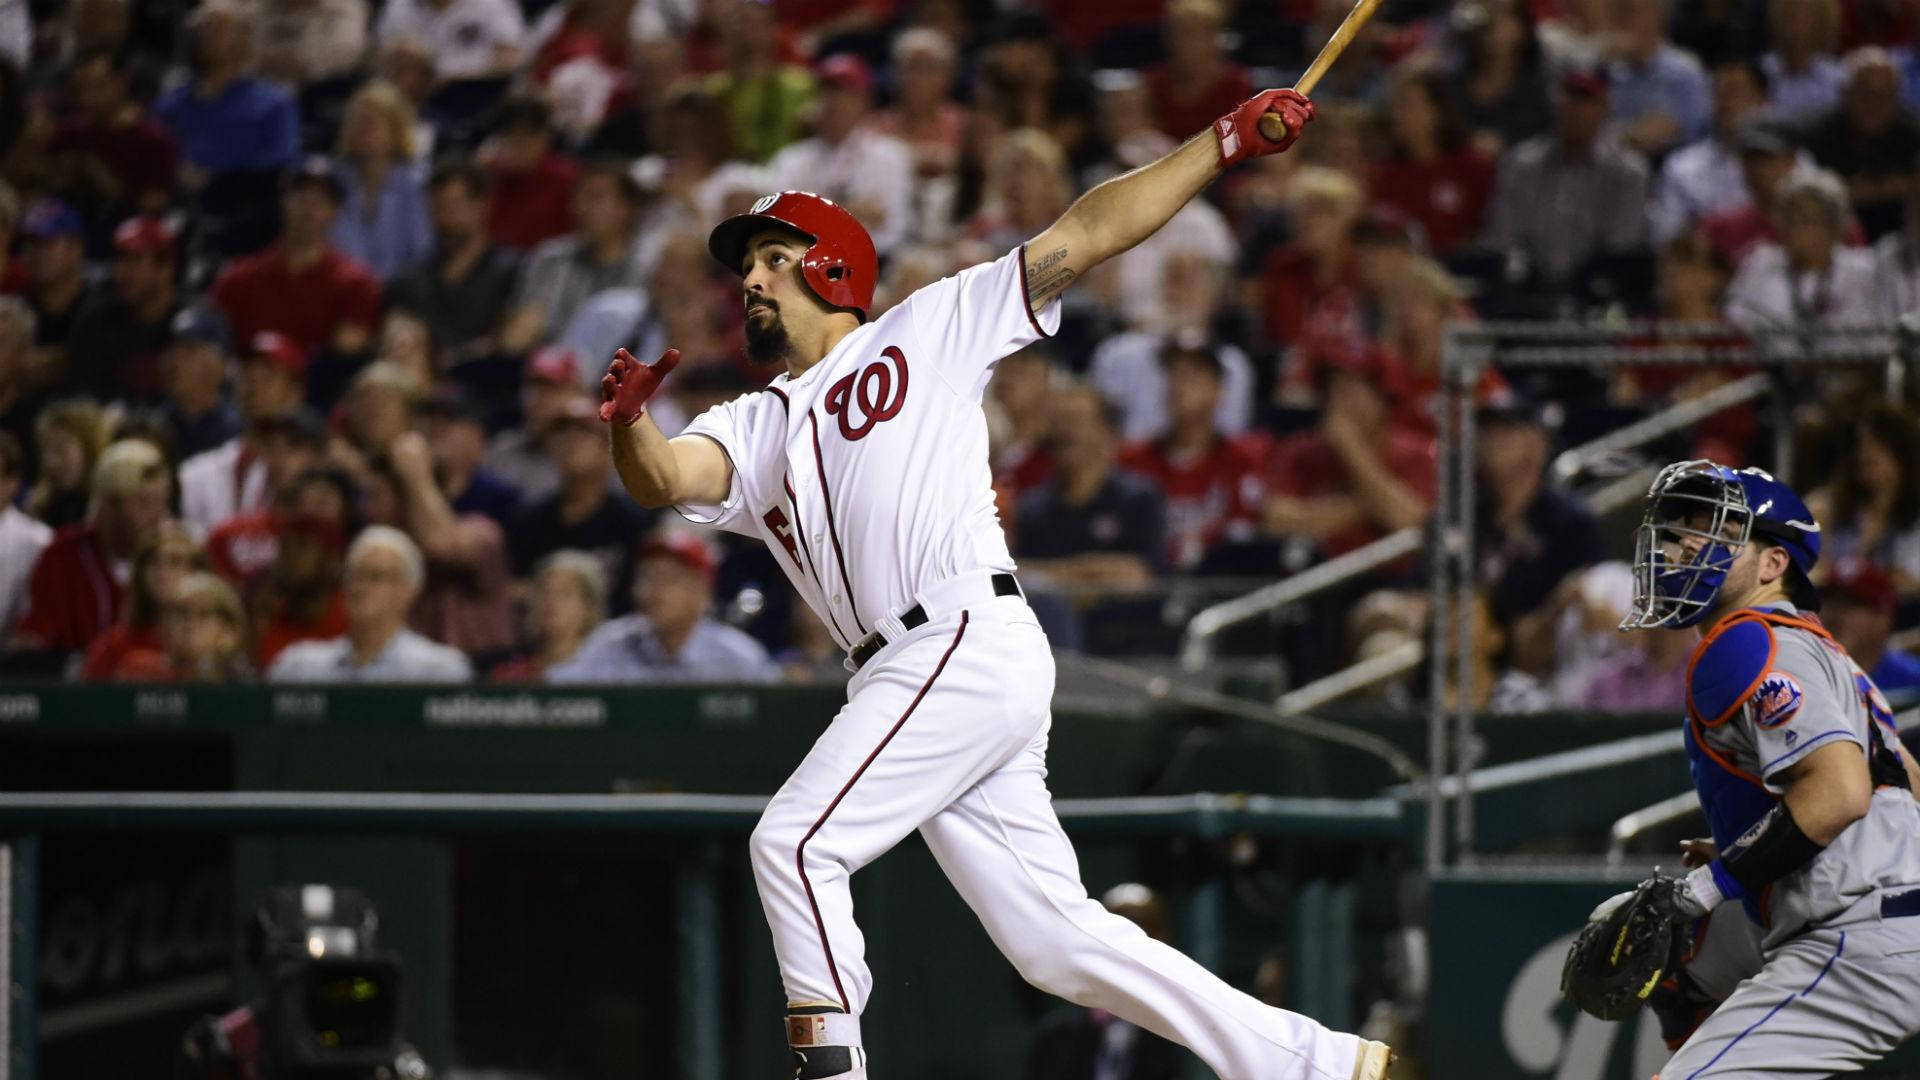 Anthony Rendon Running While Holding A Bat Background